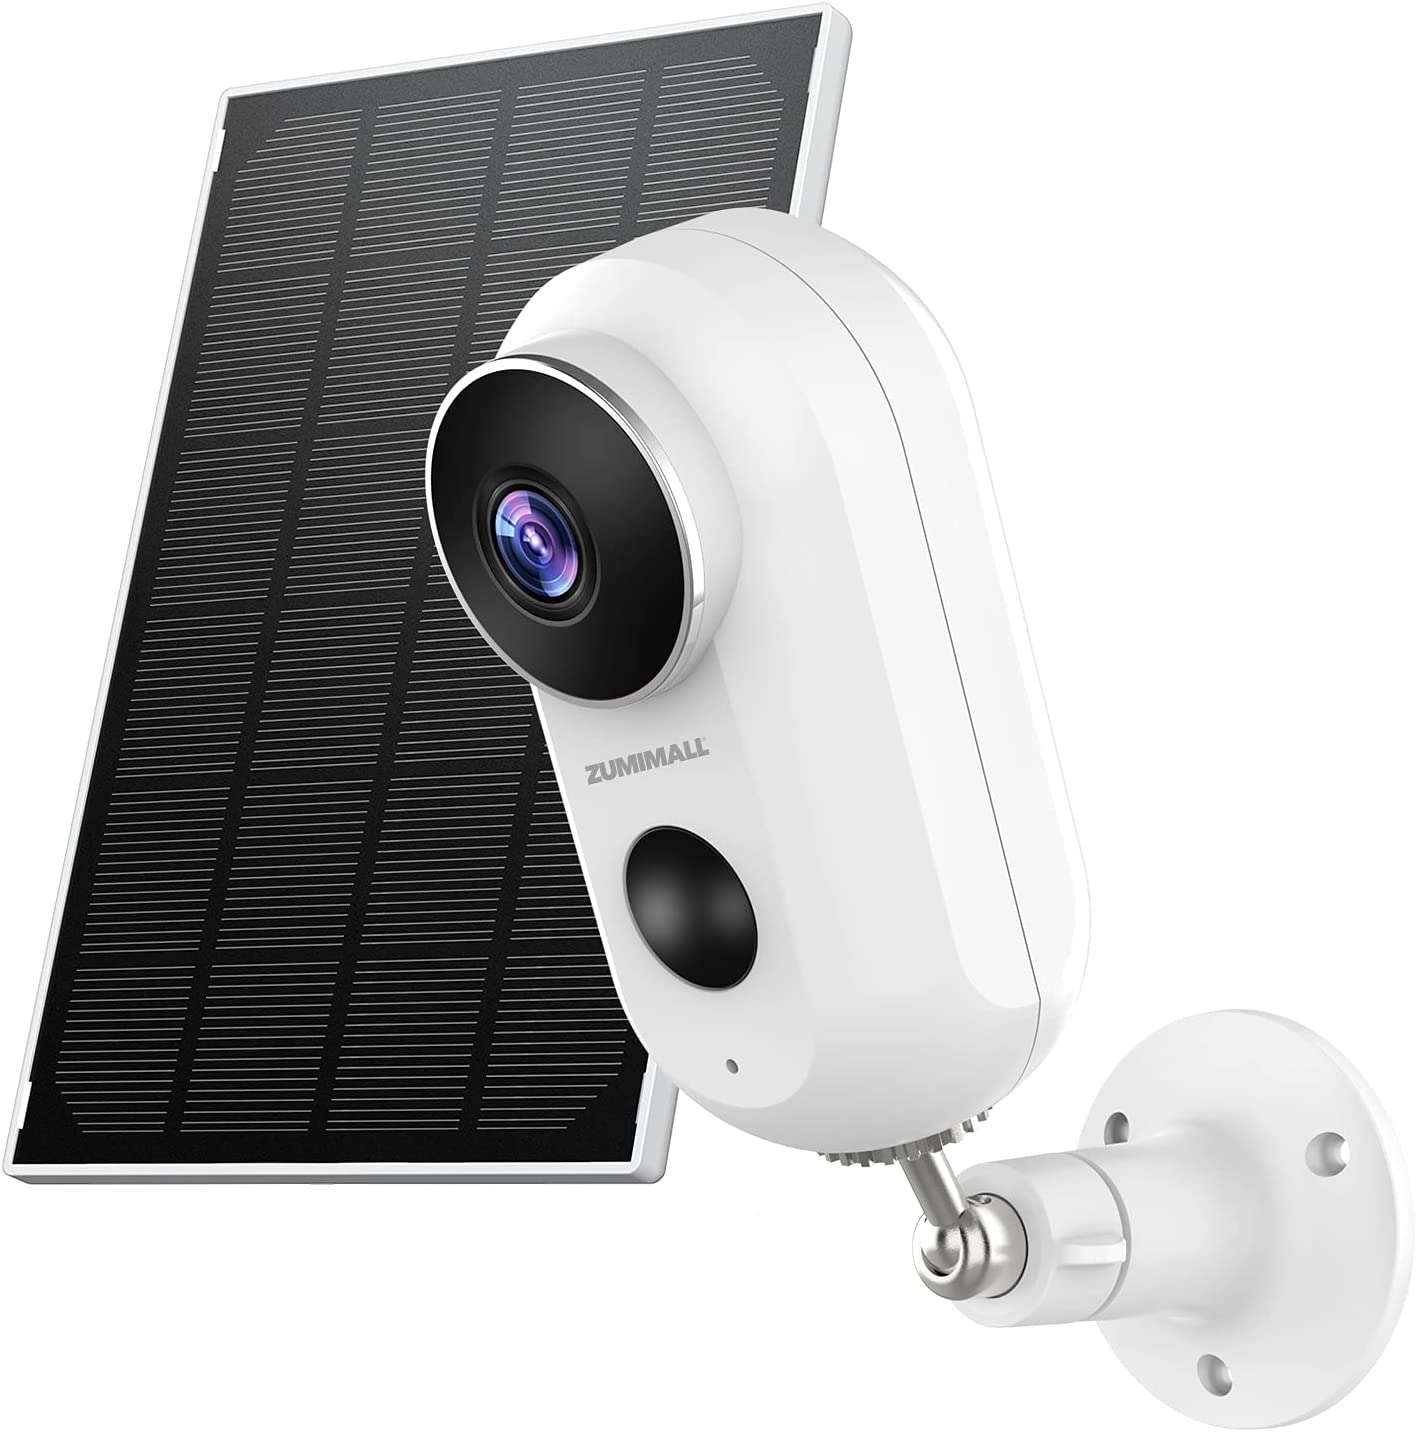 

ZUMIMALL 2K Camera Security Outdoor, Solar Powered Battery Operated Wireless FHD Camera for Home Security, Night Vision, PIR Motion Detection, IP66 Waterproof, 2.4G WiFi